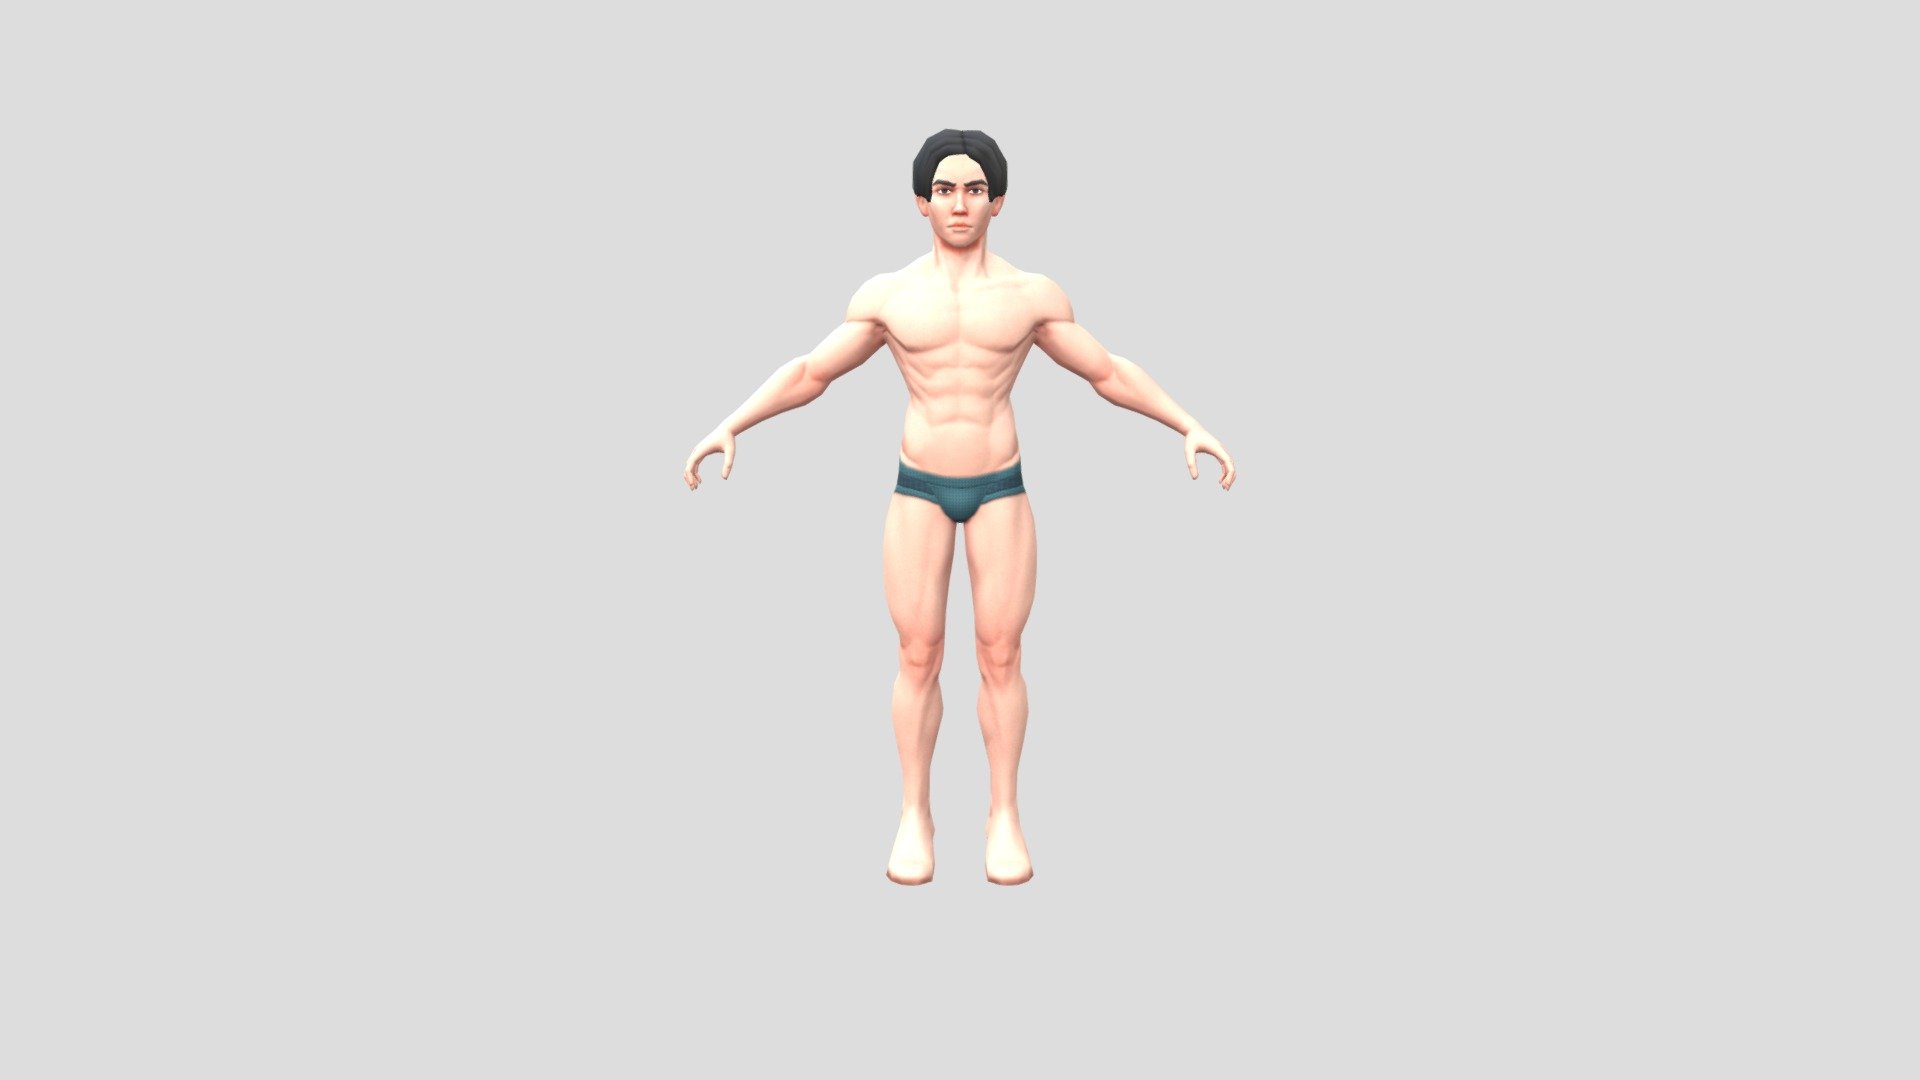 This is Jamal a Game ready Male character done in Blender. Its optimized, texturized and rigged male 3d character.

It can be used in Unity, Unreal Engine, Mixamo&hellip; etc

If you need any customized model, Contact us

If you want to buy any of our another game ready models check these links:




Kirah - Game Ready Female

Kiroh - Game Ready Male

Roxane - Female Game Ready

Roxane - Gym Female Game Ready

Karlota - Gym Female Game ready

Aaron - Gym Male Game ready

Laia - Female Warrior Game Ready

Jennifer - Female Game Ready Horror

Kirah (with Clothes) - Game ready Female 

Kiroh (with Clothes - Game Ready Male

Instagram - Jamal - Low poly 3d Character - Rigged - Buy Royalty Free 3D model by Your 3D Character (@your3dcharacter) 3d model